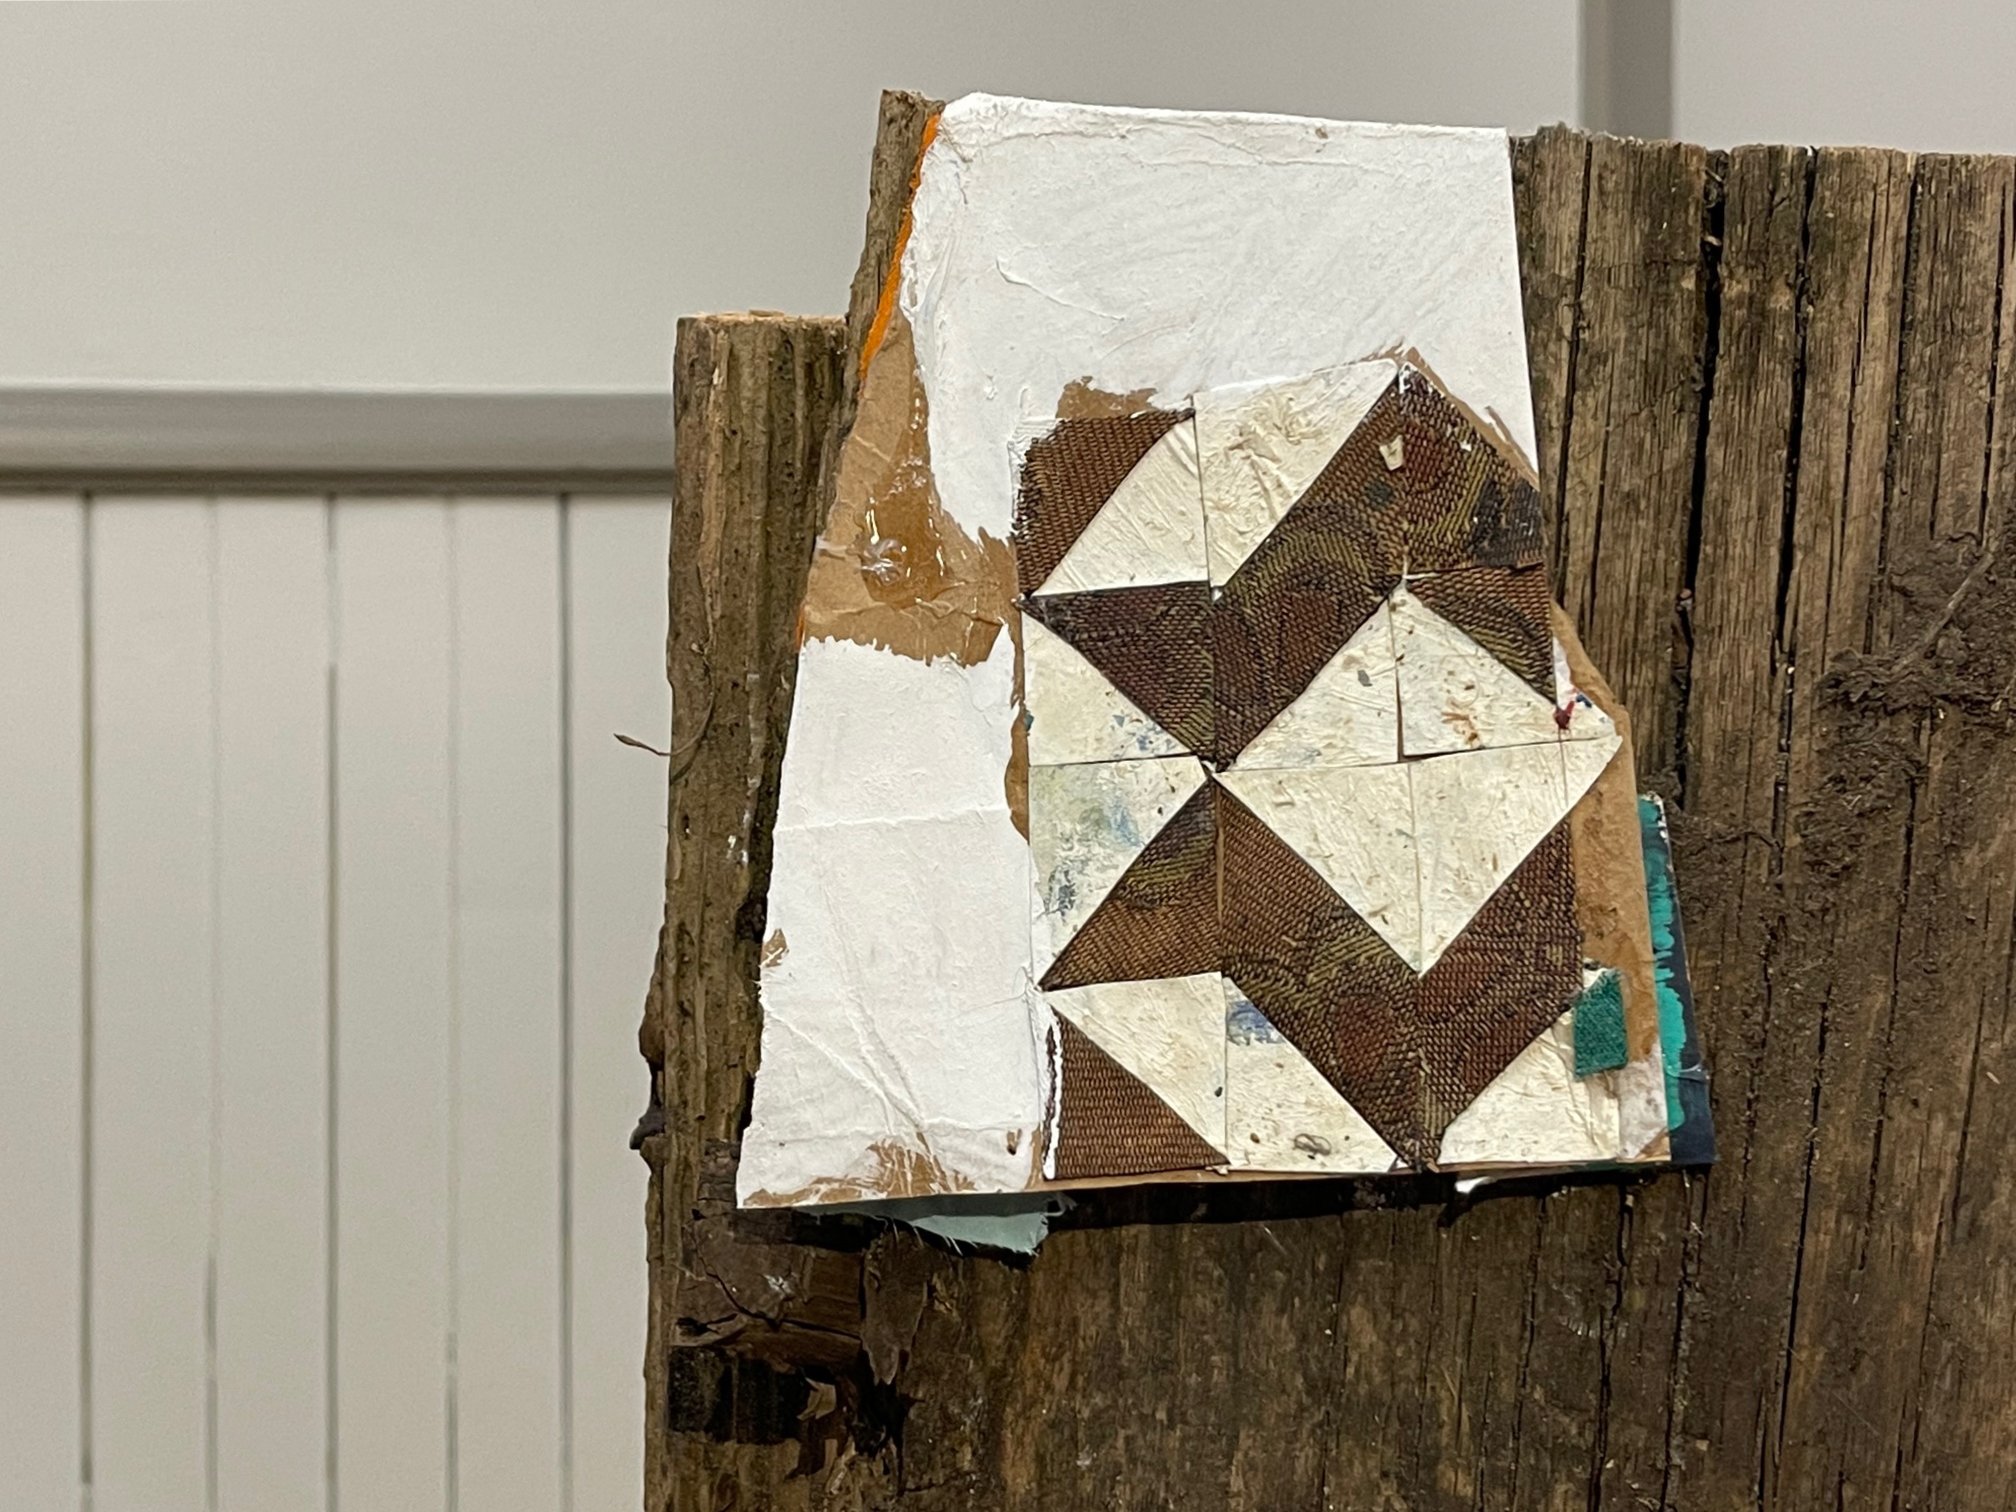  Detail image for “Untitled.” Textile, house paint, cardboard, wood from a 120-year-old home from the local community. Photo by Edra Soto.  